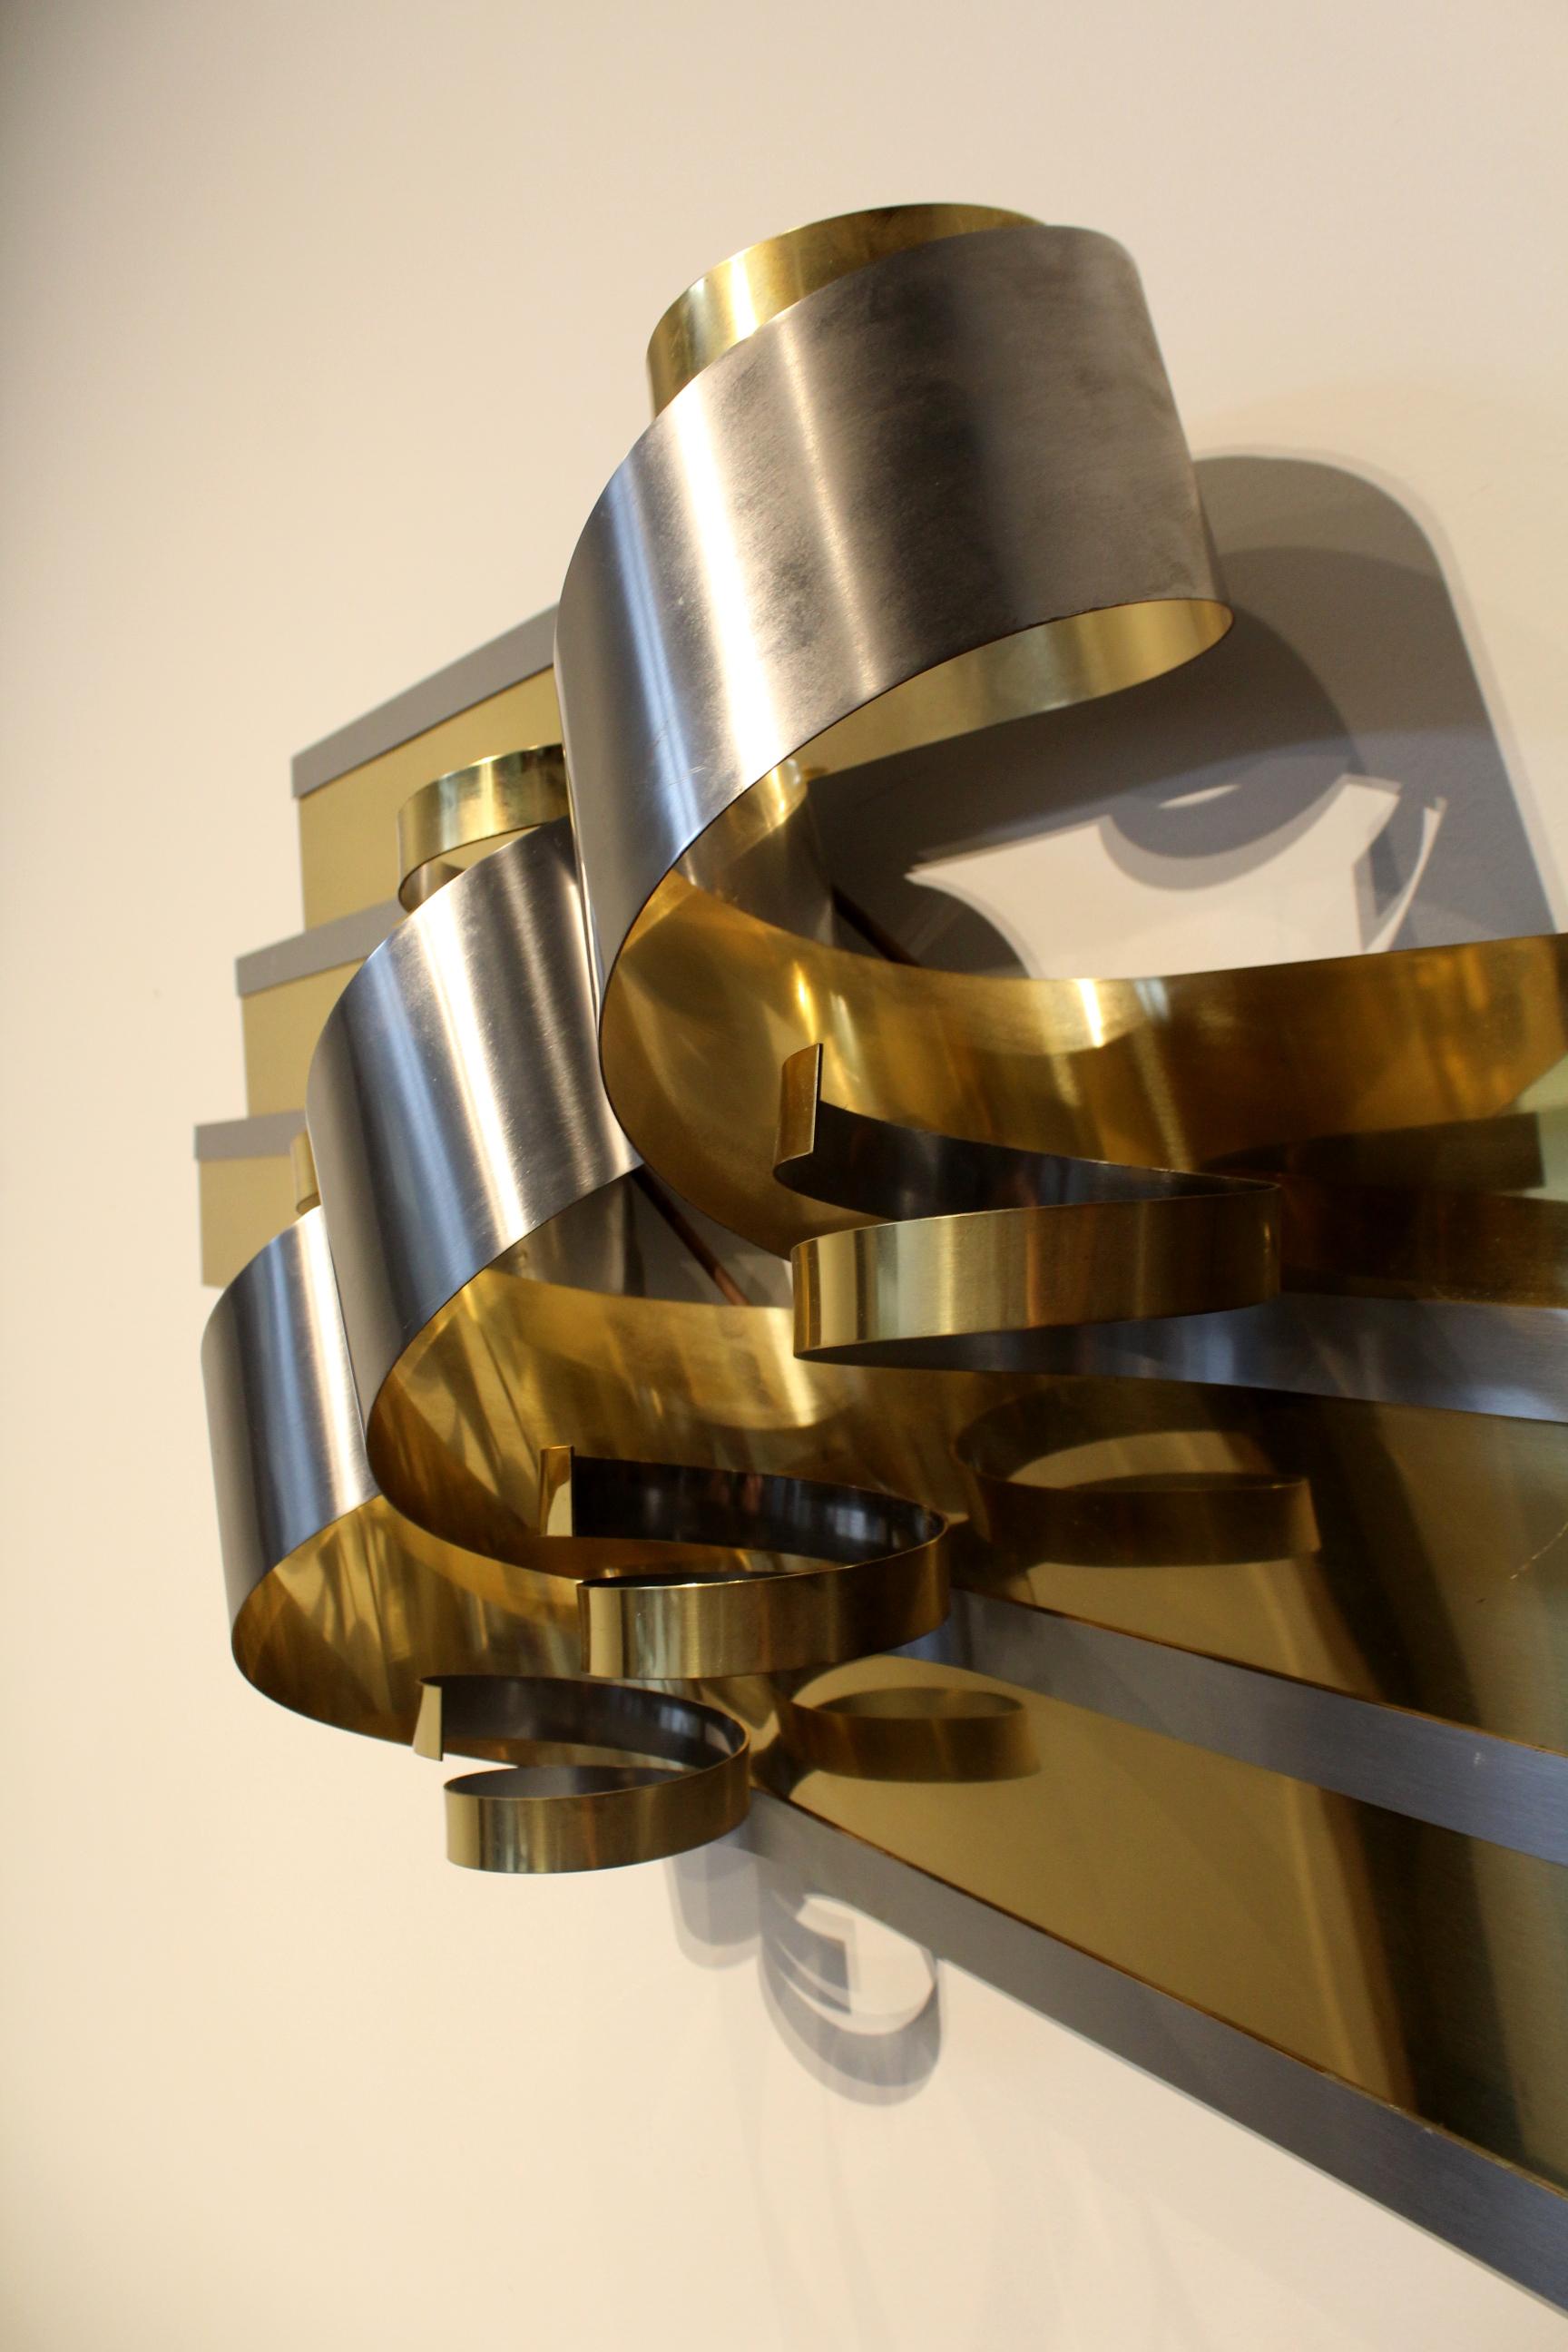 Large C. Jere Chrome and Brass Ribbon Wall Sculpture im Zustand „Gut“ im Angebot in Dallas, TX